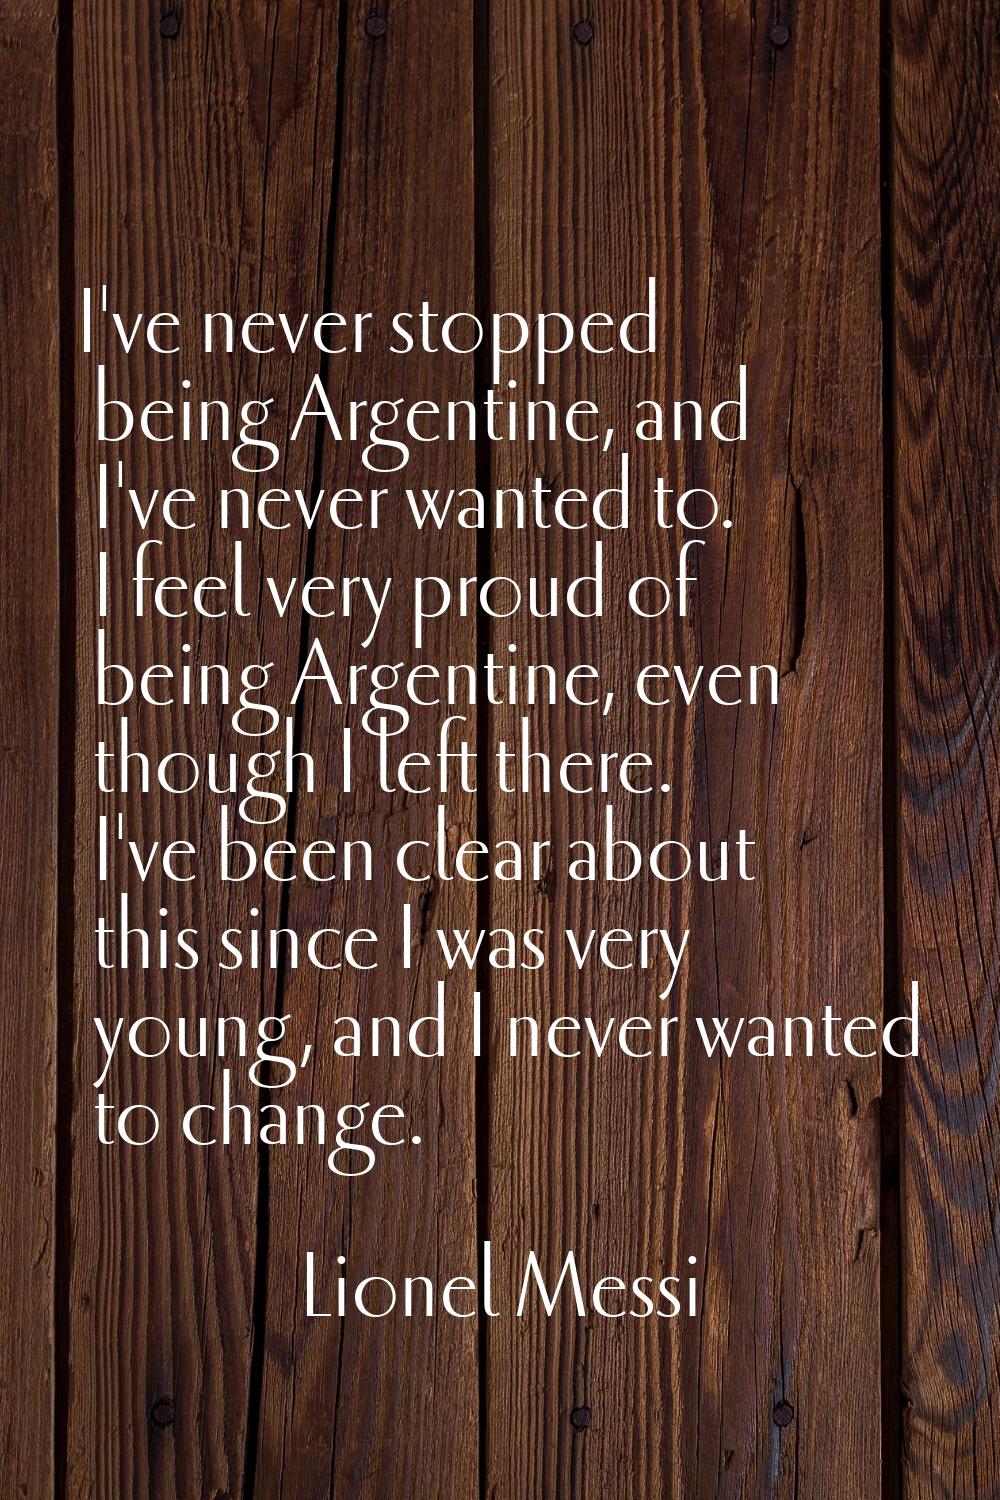 I've never stopped being Argentine, and I've never wanted to. I feel very proud of being Argentine,